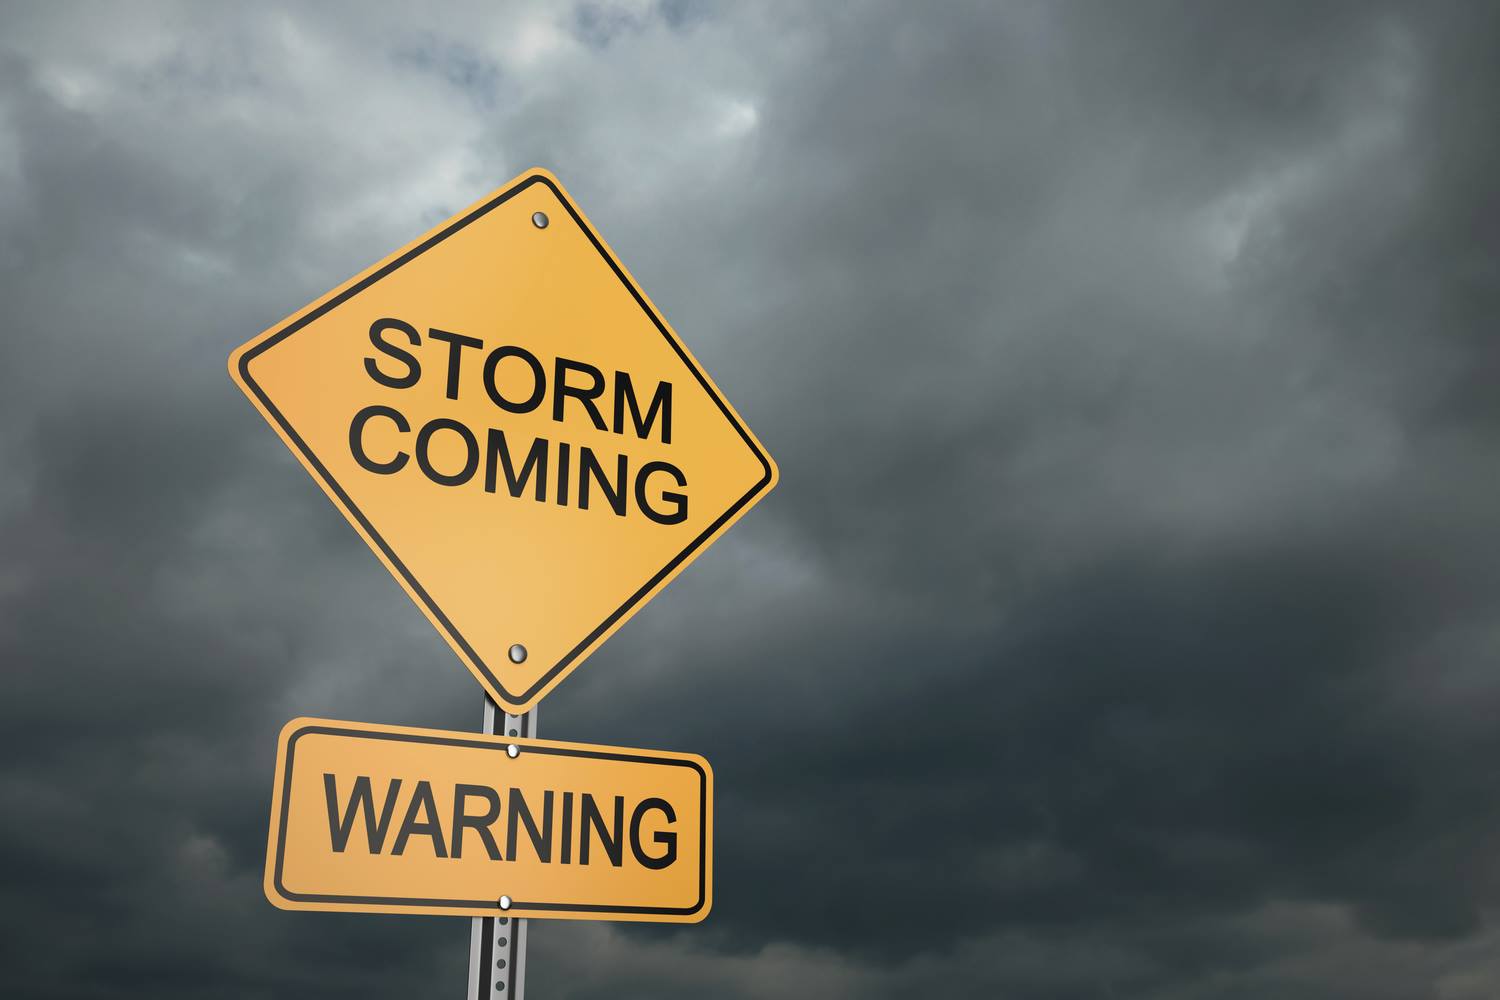 Mayor’s Blog – A Perfect Storm